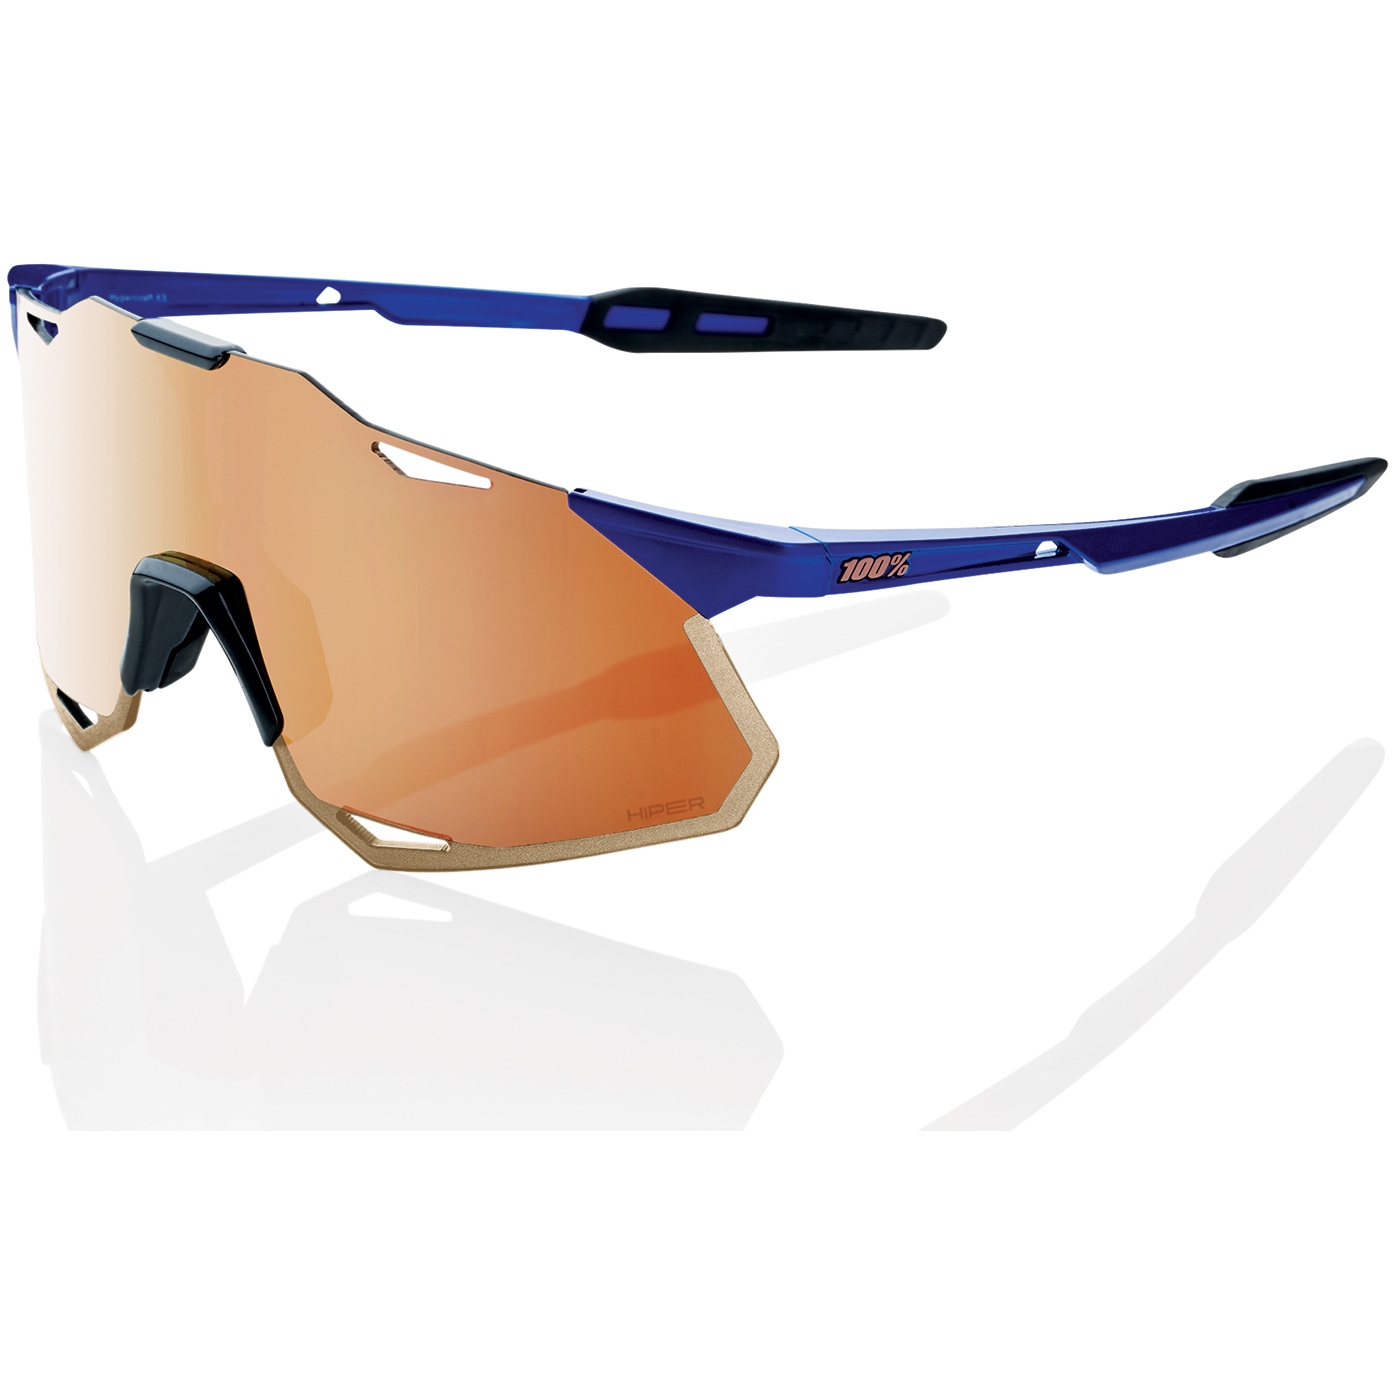 Picture of 100% Hypercraft XS Glasses - HiPER Mirror Lens - Gloss Cobalt Blue / Copper + Clear